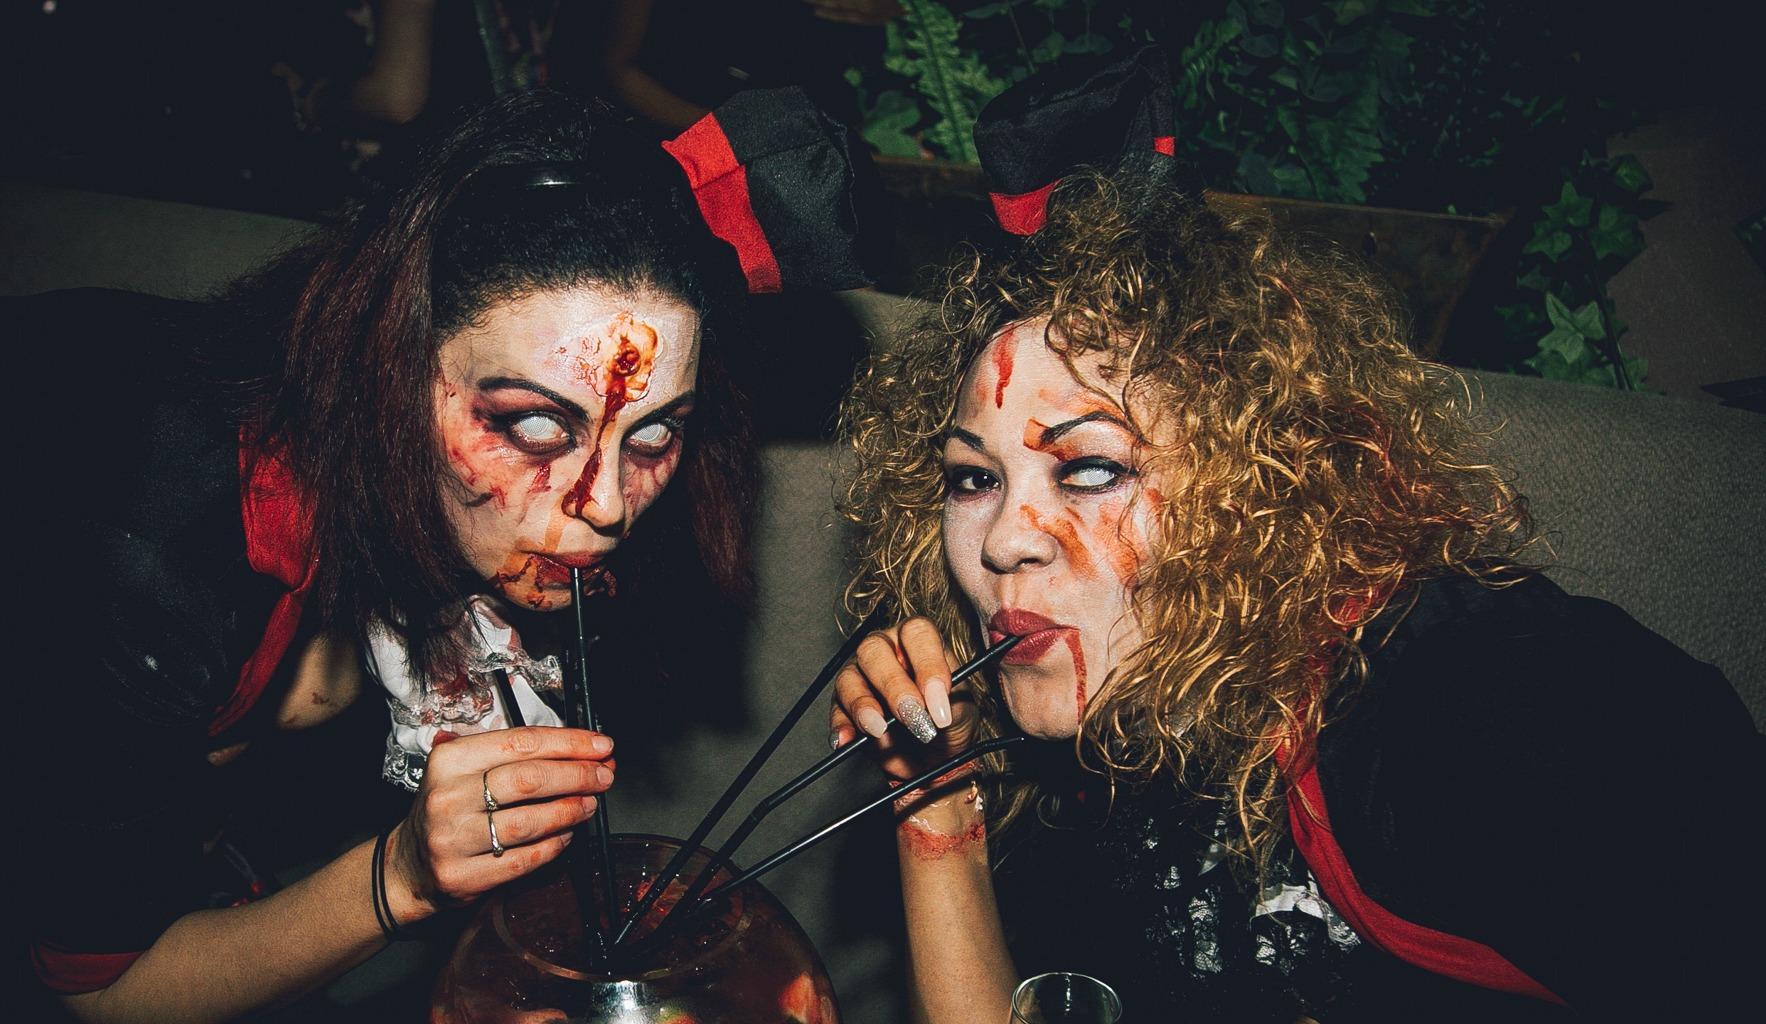 Get ready for a gory night at the Circus of Horrors in Nottingham